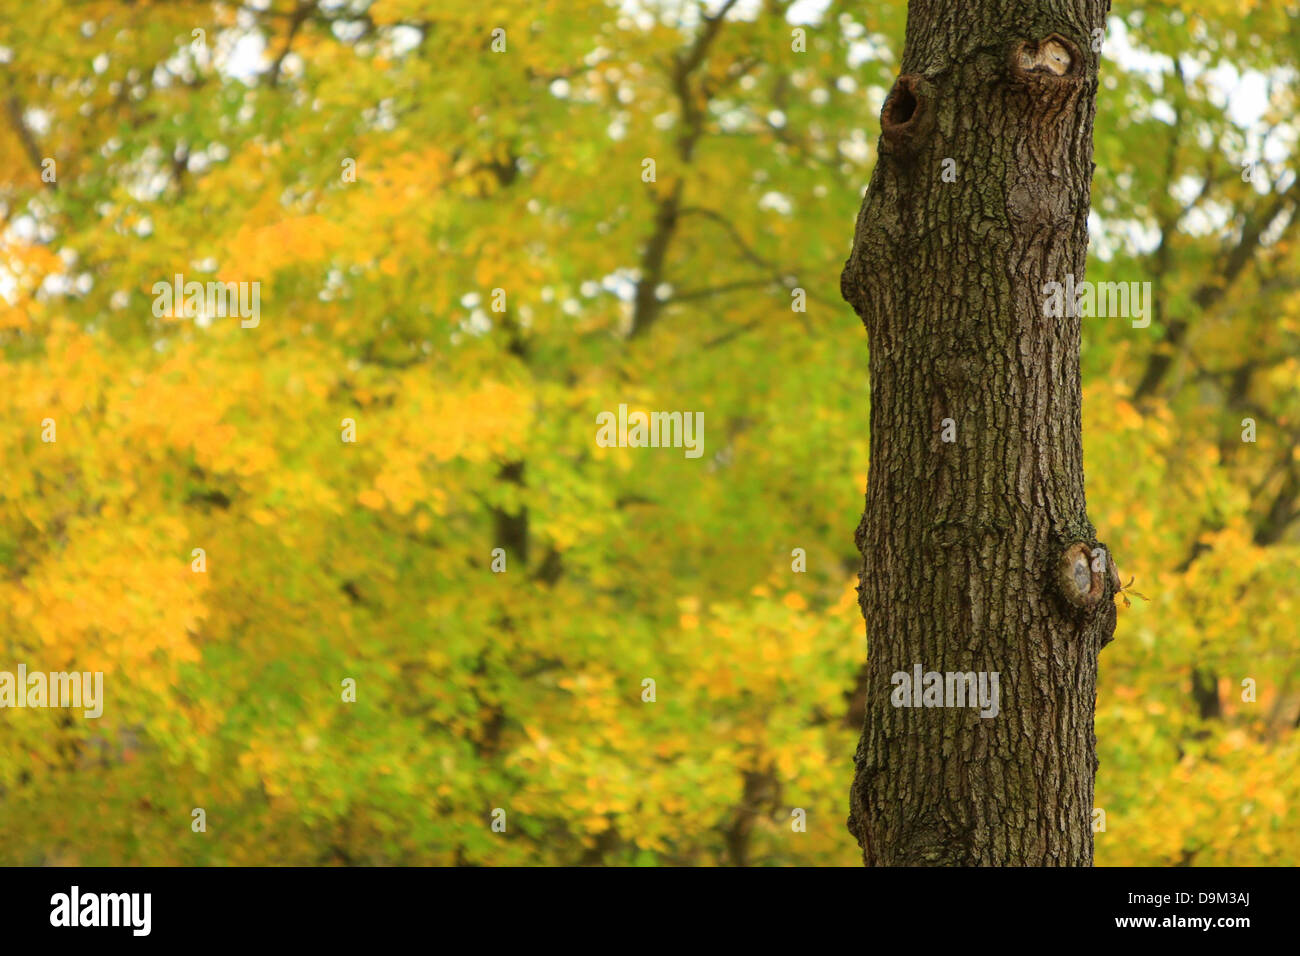 maple tree trunk with yellow and green autumn, fall leaves in background Stock Photo